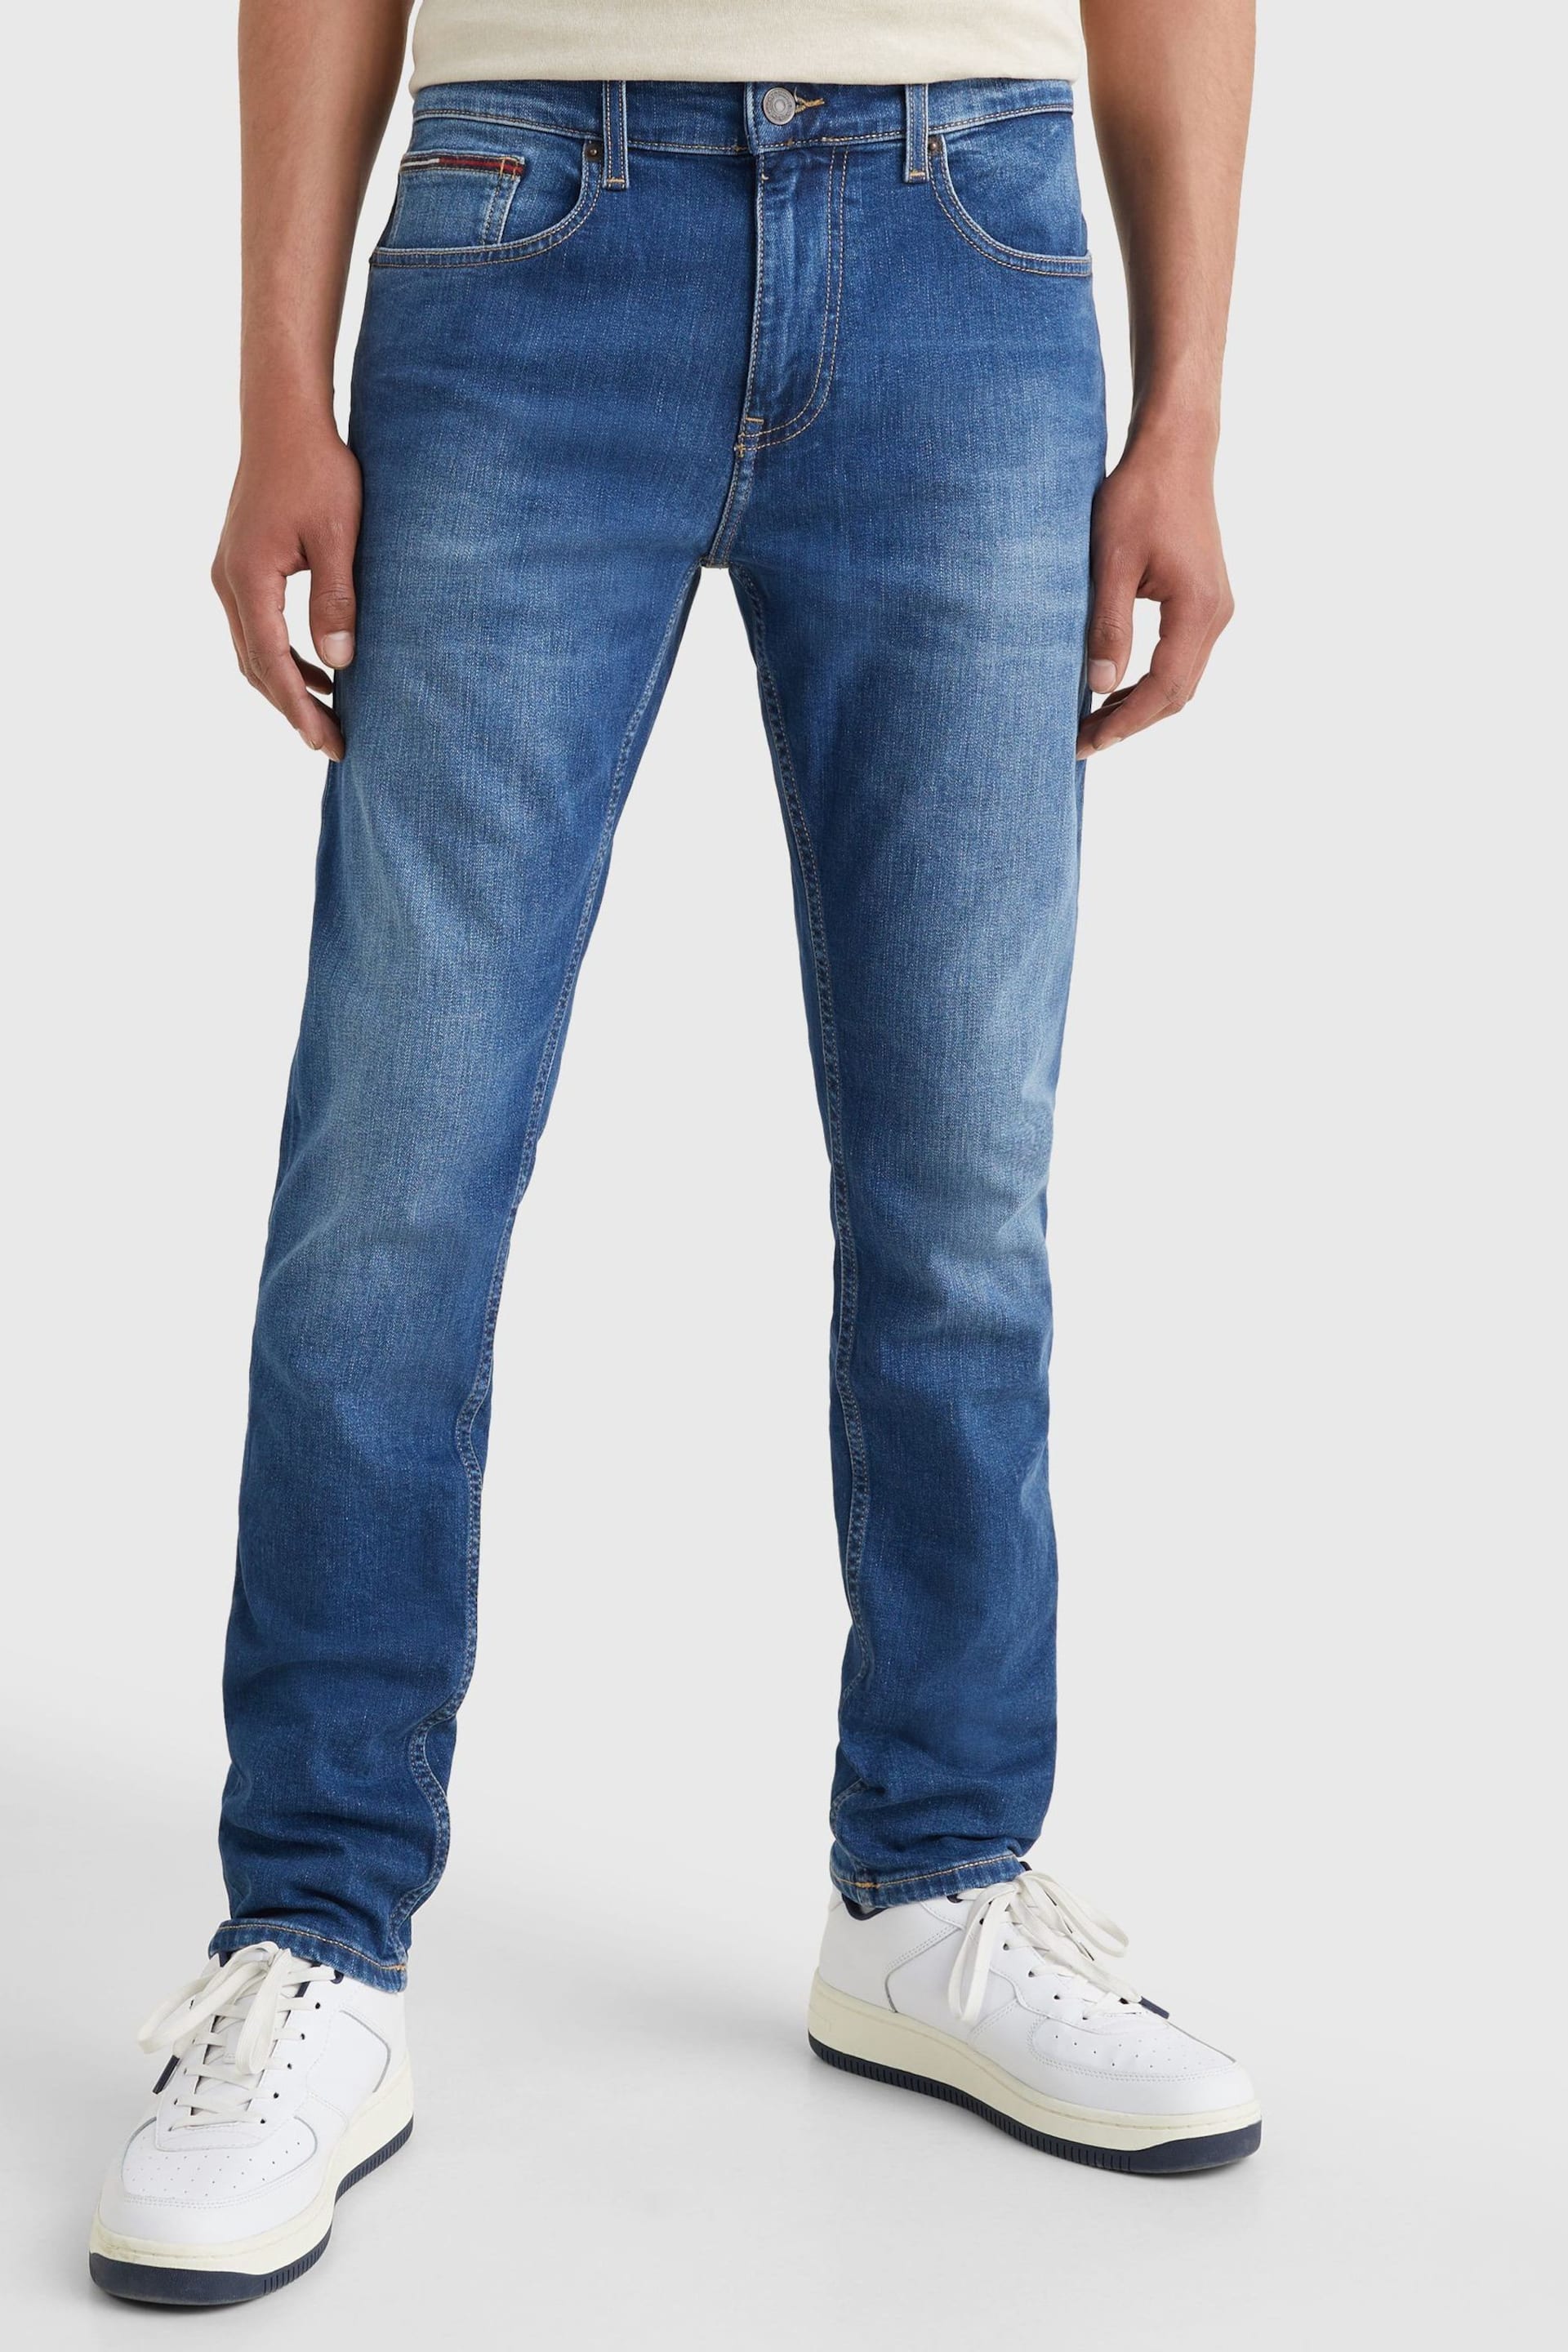 Tommy Jeans Blue Slim Tapered Fit Faded Jeans - Image 1 of 4